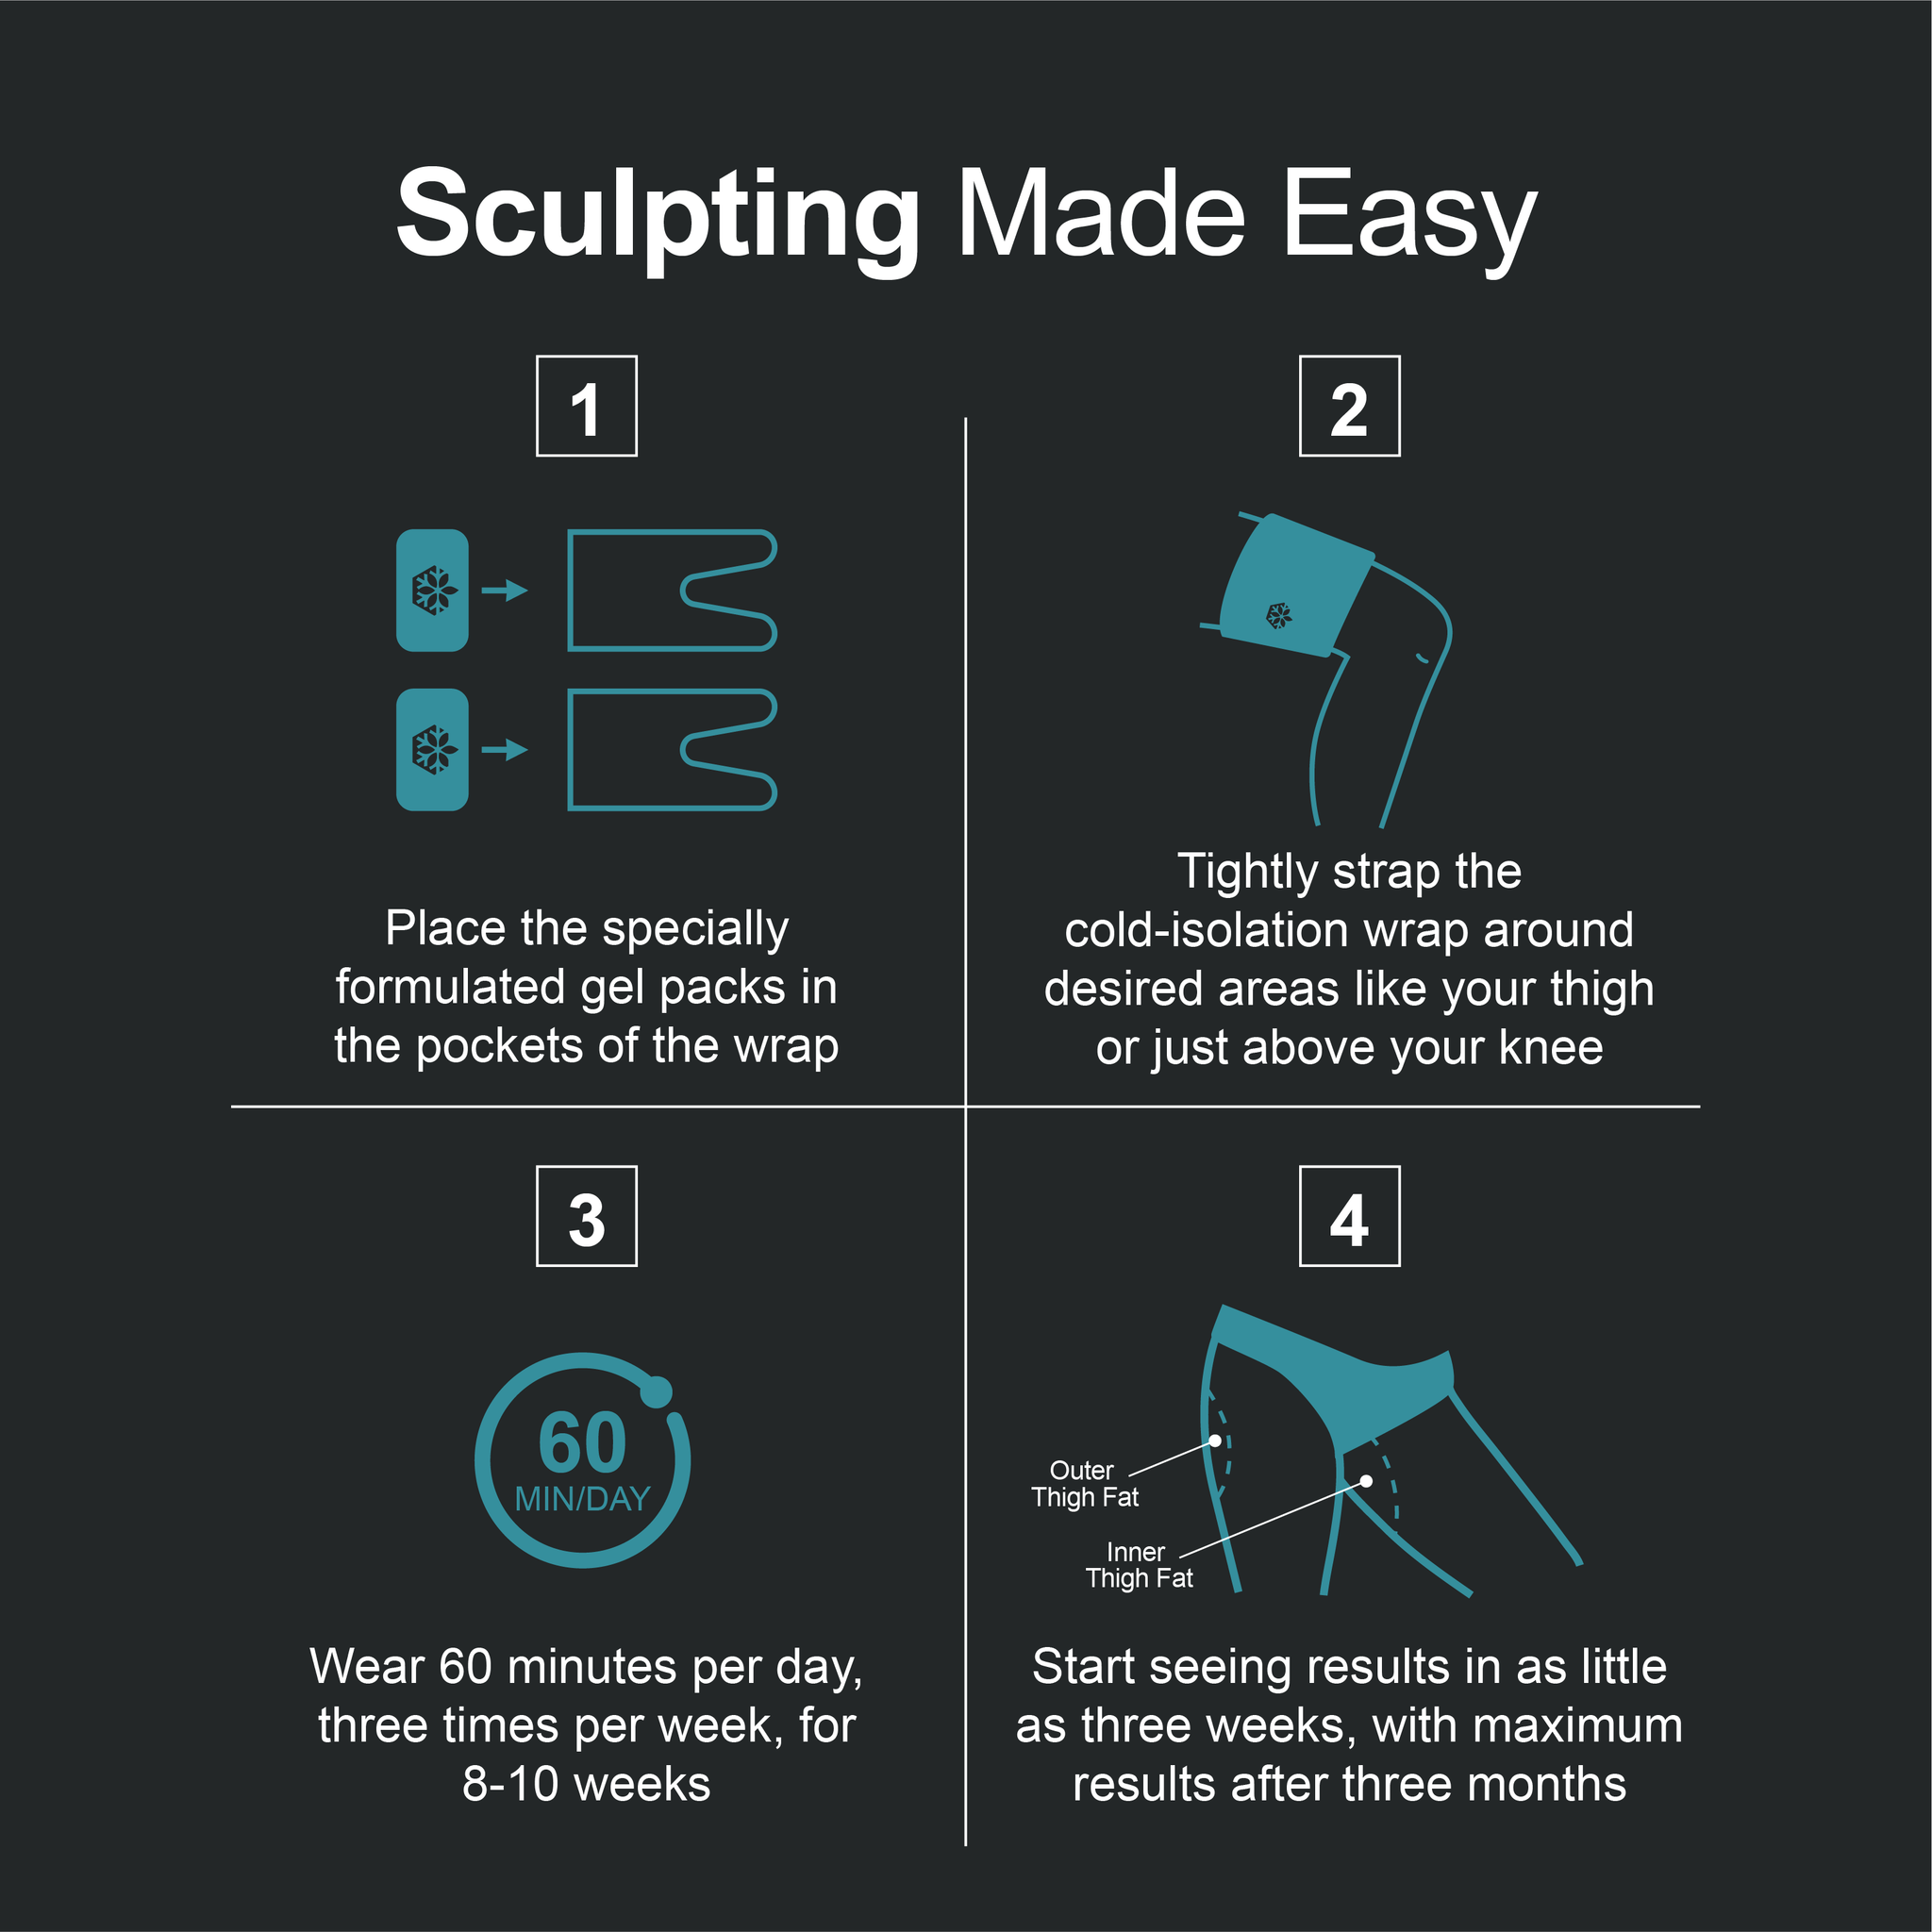 Sculpting made easy steps